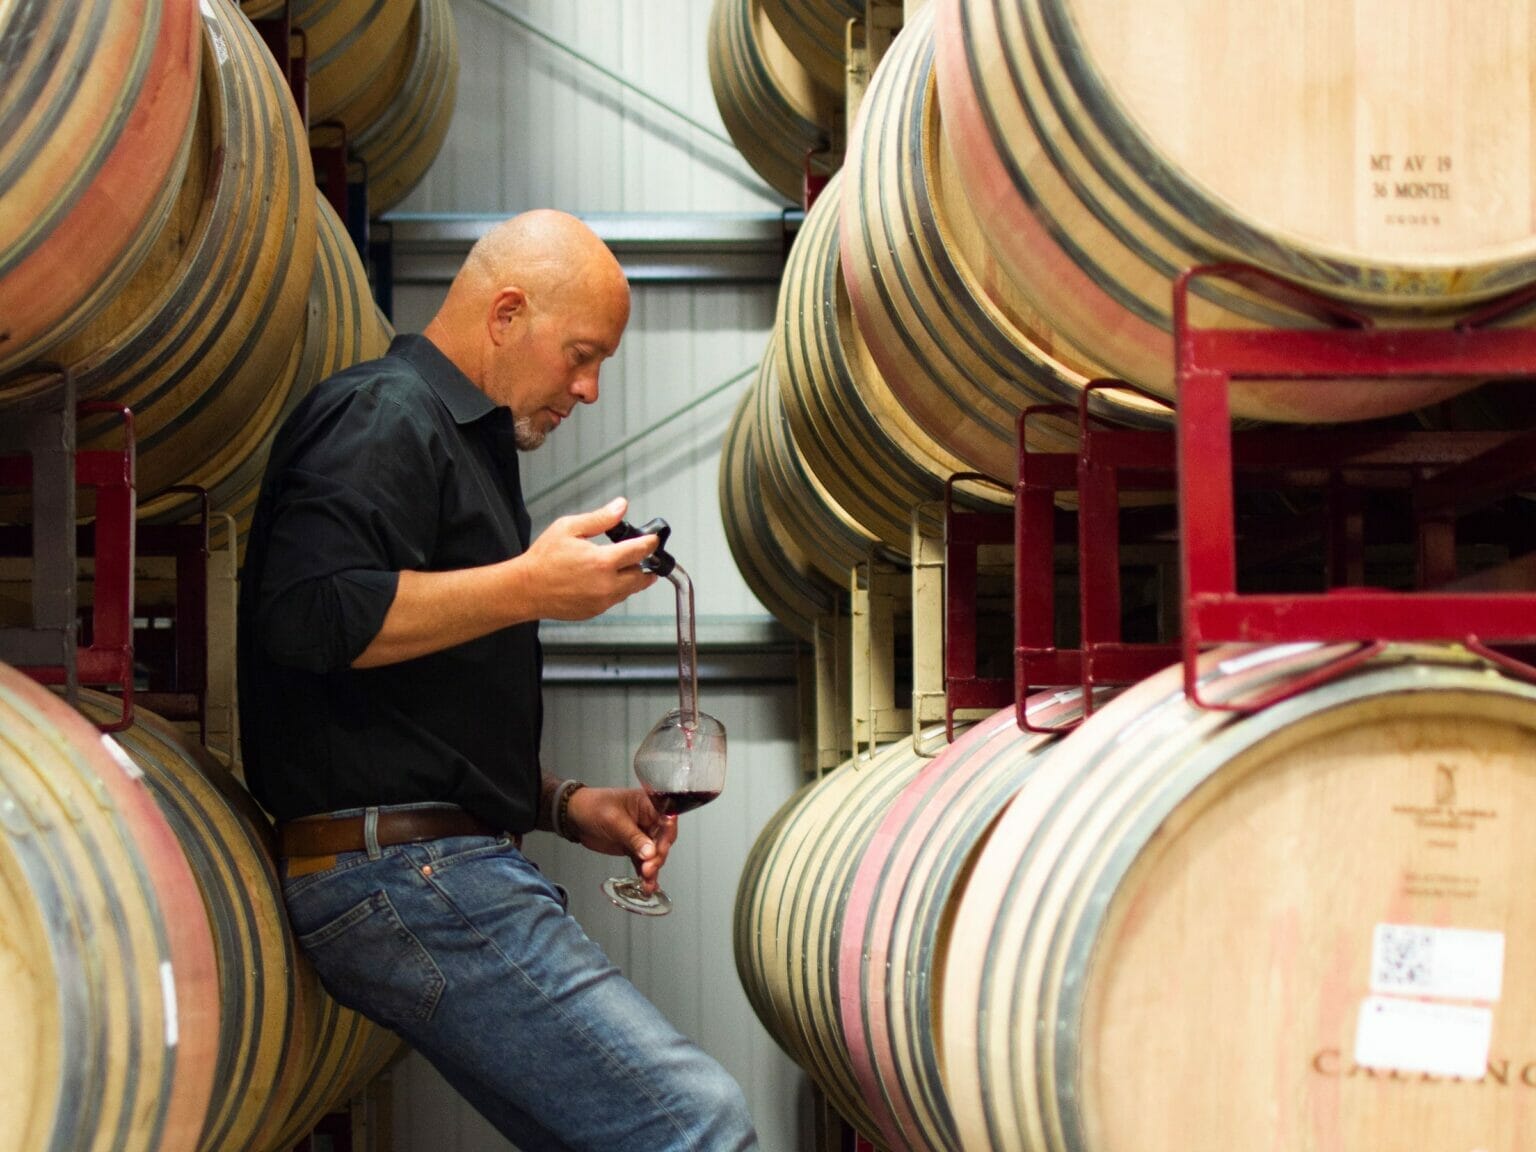 James MacPhail, The Calling's Winemaker, tests his latest vintage around casks of wine - The Calling